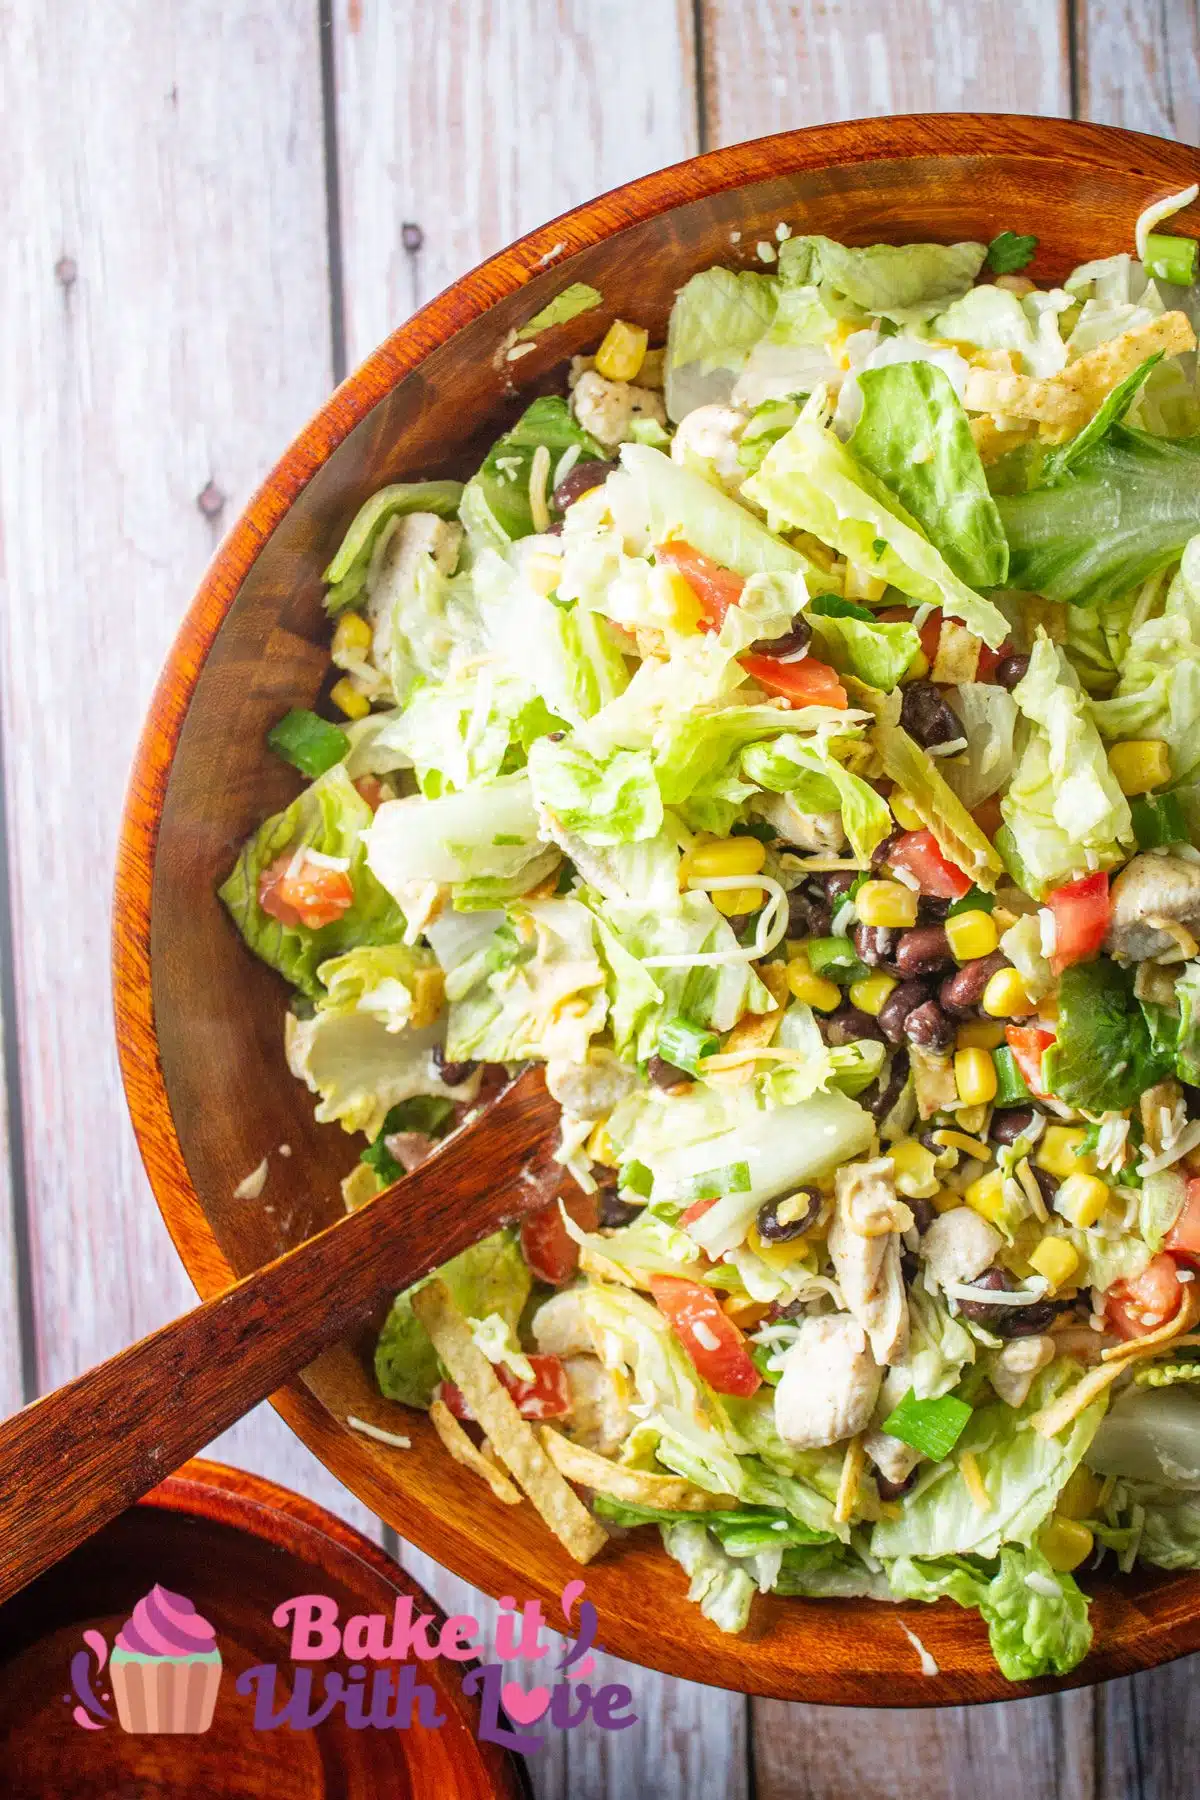 Tall image of a Tex-Mex salad in a wooden bowl.